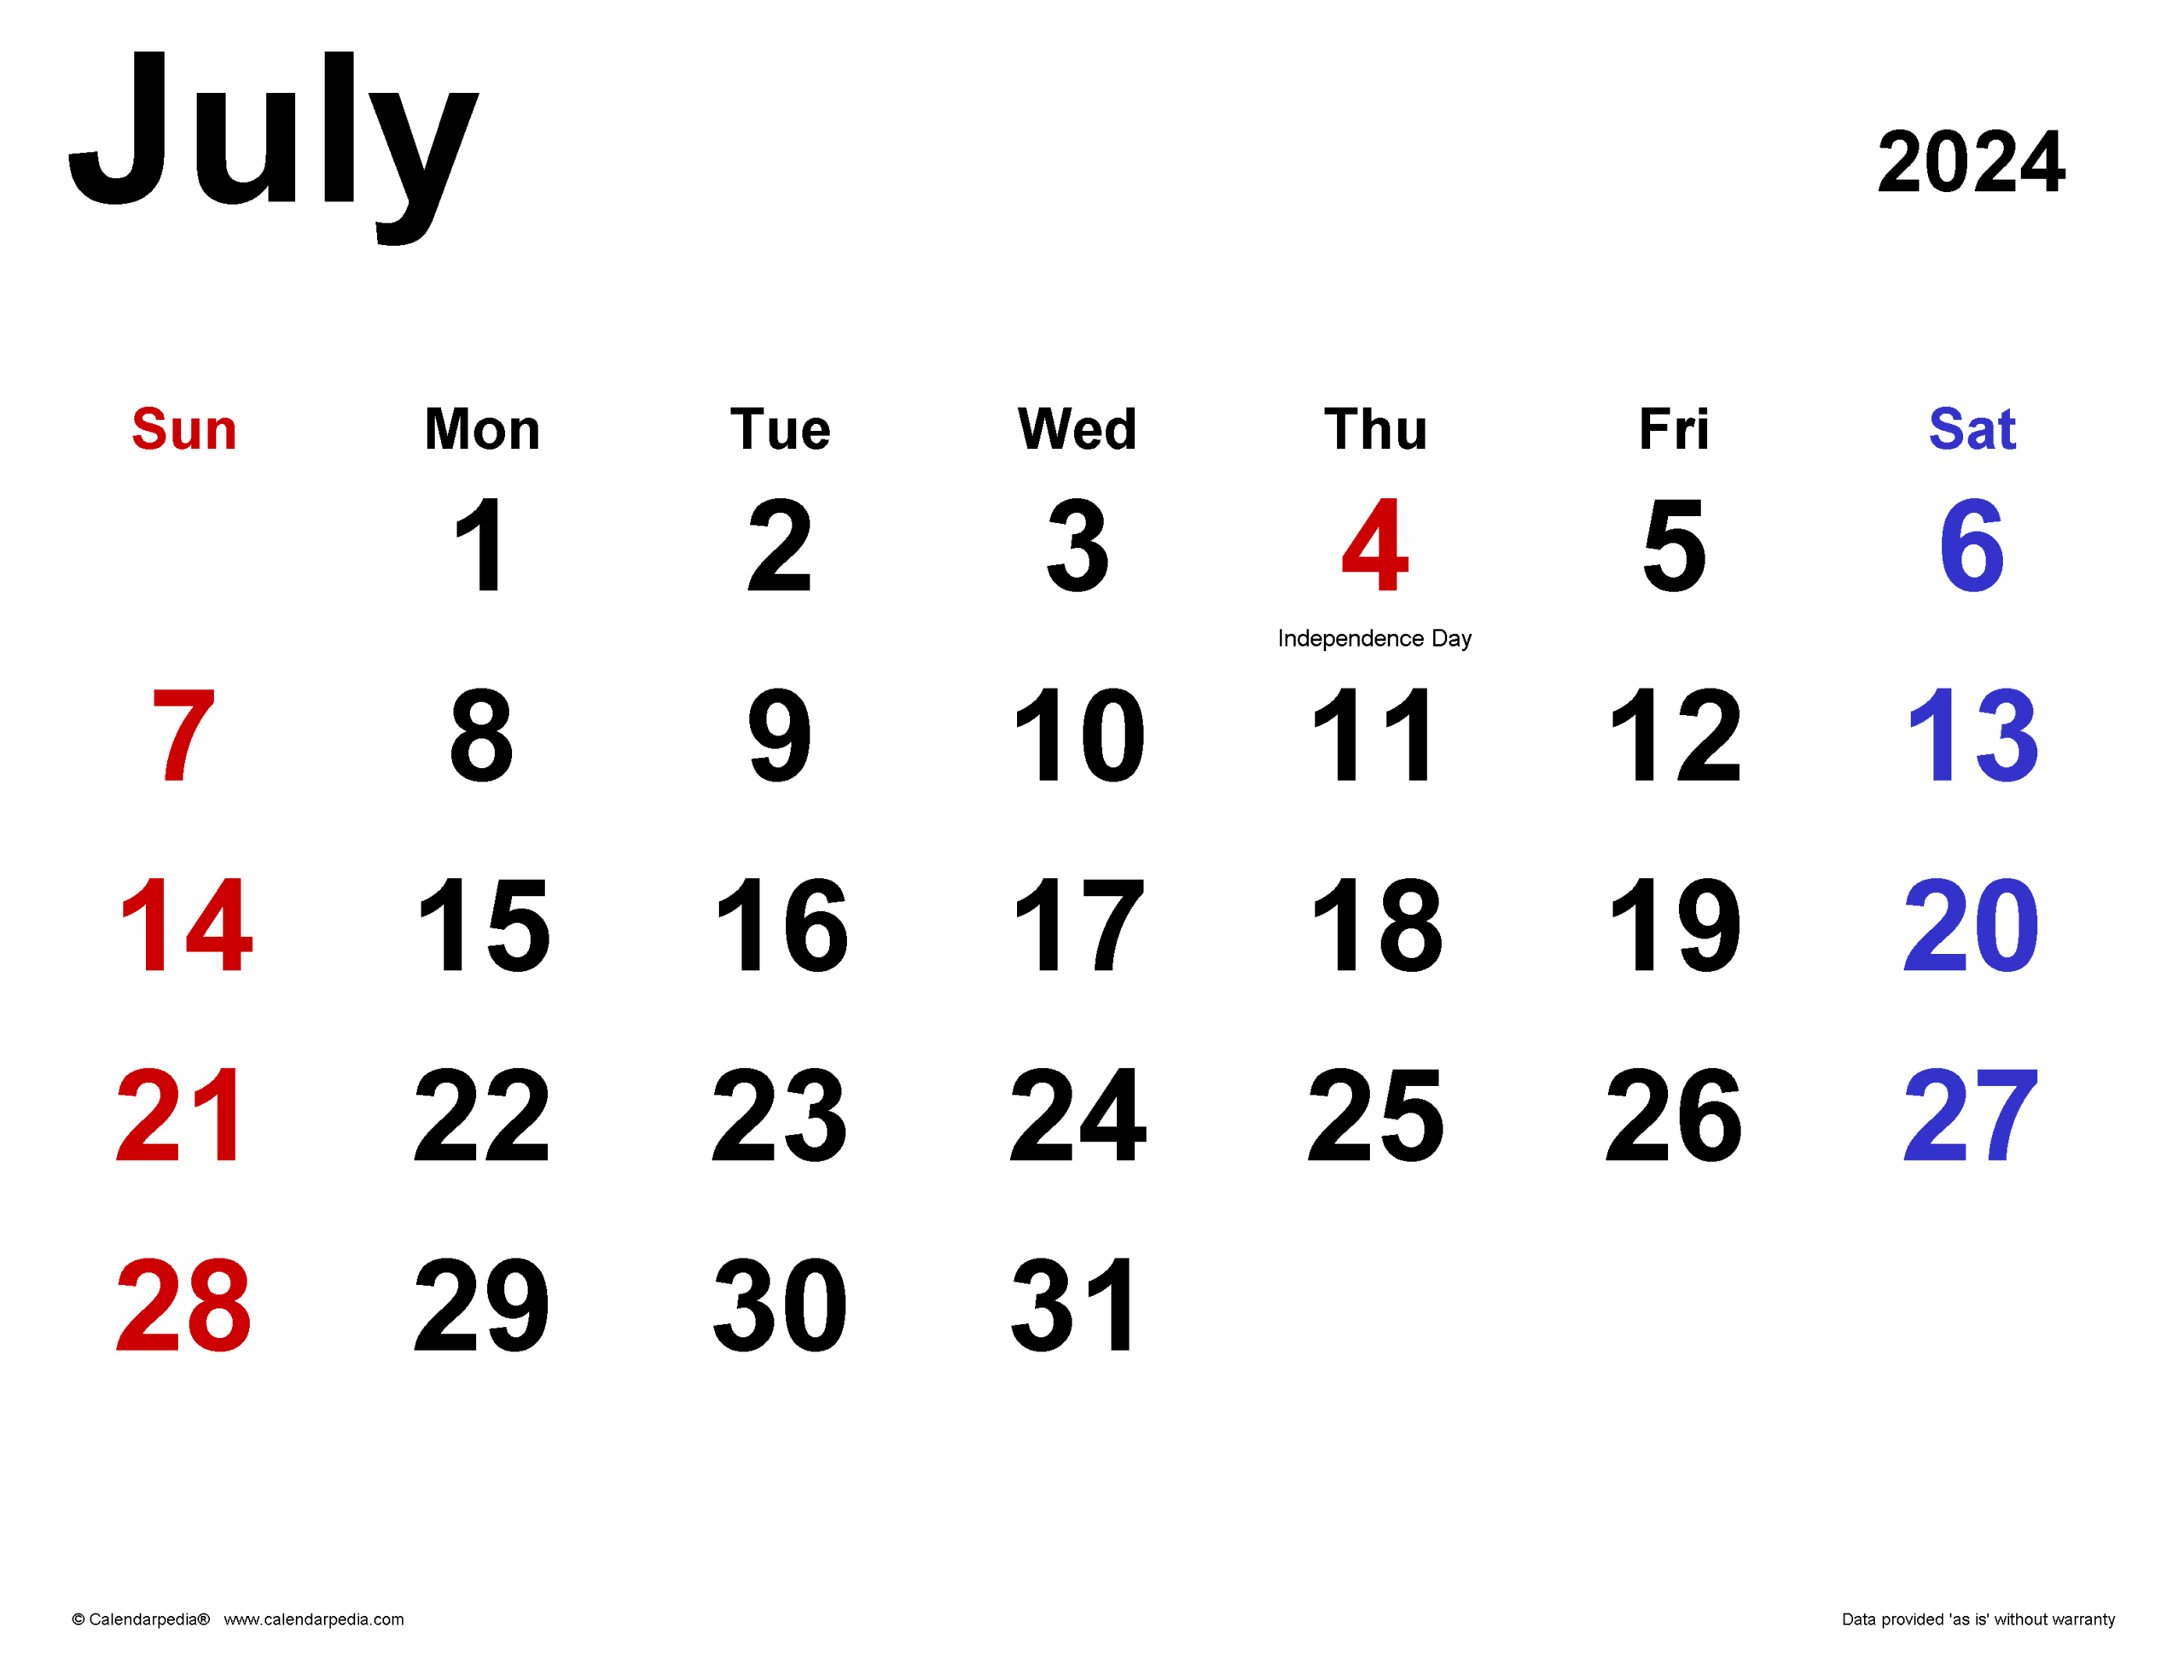 July 2024 Calendar | Templates For Word, Excel And Pdf pertaining to July 2024 Calendar Word Template